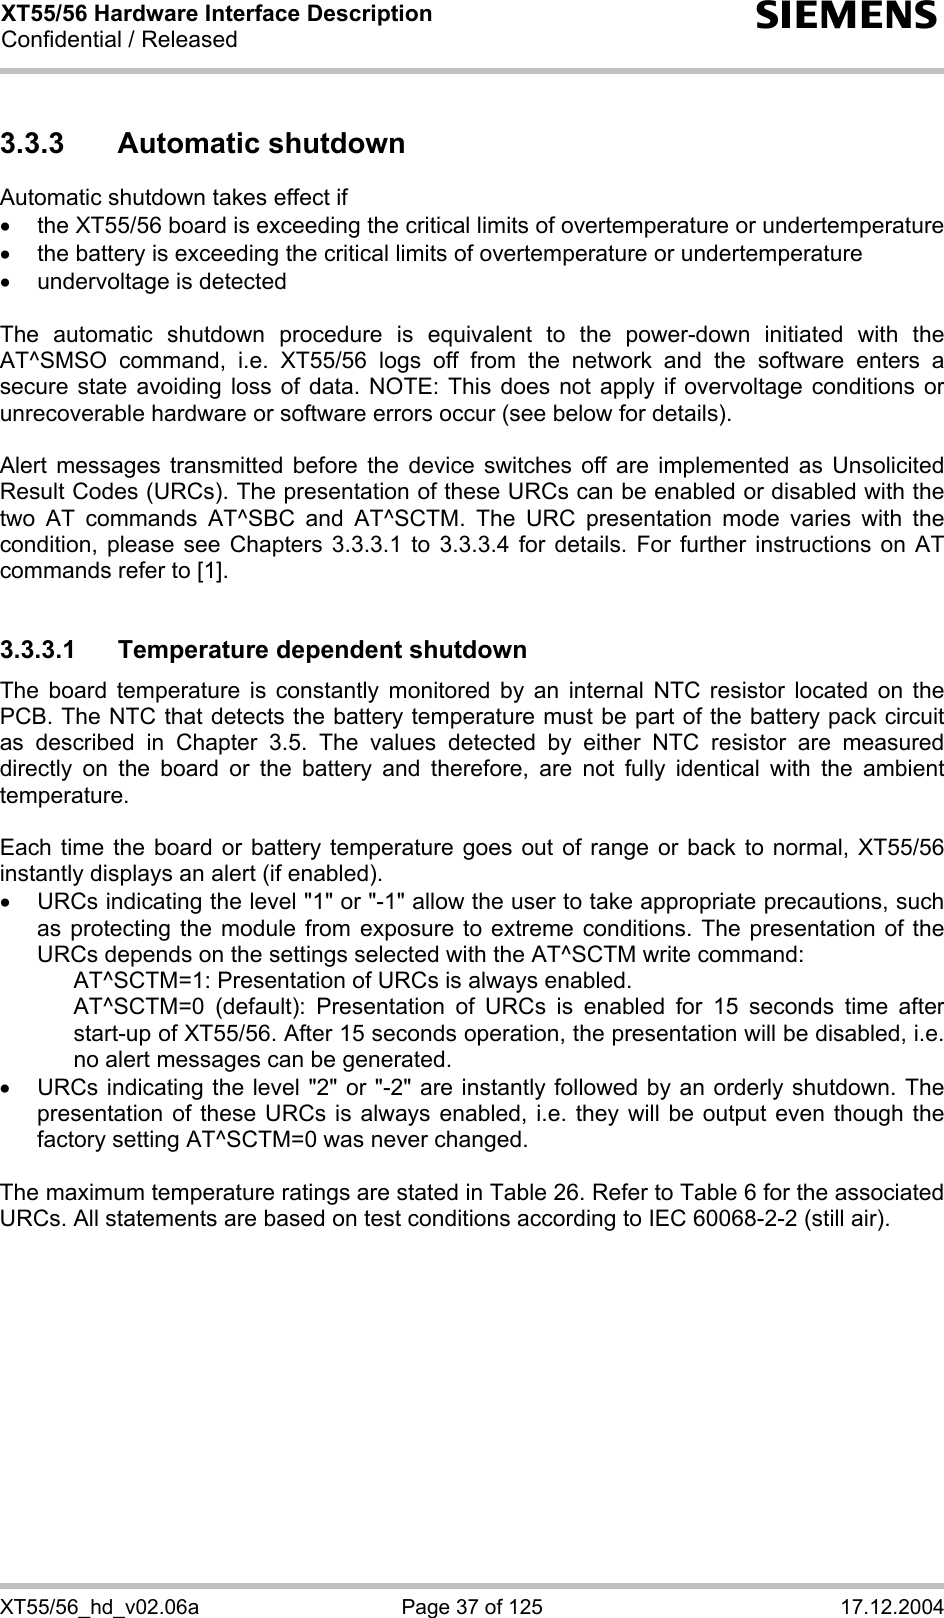 XT55/56 Hardware Interface Description Confidential / Released s XT55/56_hd_v02.06a  Page 37 of 125  17.12.2004 3.3.3 Automatic shutdown Automatic shutdown takes effect if •  the XT55/56 board is exceeding the critical limits of overtemperature or undertemperature •  the battery is exceeding the critical limits of overtemperature or undertemperature •  undervoltage is detected  The automatic shutdown procedure is equivalent to the power-down initiated with the AT^SMSO command, i.e. XT55/56 logs off from the network and the software enters a secure state avoiding loss of data. NOTE: This does not apply if overvoltage conditions or unrecoverable hardware or software errors occur (see below for details).  Alert messages transmitted before the device switches off are implemented as Unsolicited Result Codes (URCs). The presentation of these URCs can be enabled or disabled with the two AT commands AT^SBC and AT^SCTM. The URC presentation mode varies with the condition, please see Chapters 3.3.3.1 to 3.3.3.4 for details. For further instructions on AT commands refer to [1].  3.3.3.1  Temperature dependent shutdown The board temperature is constantly monitored by an internal NTC resistor located on the PCB. The NTC that detects the battery temperature must be part of the battery pack circuit as described in Chapter 3.5. The values detected by either NTC resistor are measured directly on the board or the battery and therefore, are not fully identical with the ambient temperature.   Each time the board or battery temperature goes out of range or back to normal, XT55/56 instantly displays an alert (if enabled). •  URCs indicating the level &quot;1&quot; or &quot;-1&quot; allow the user to take appropriate precautions, such as protecting the module from exposure to extreme conditions. The presentation of the URCs depends on the settings selected with the AT^SCTM write command:     AT^SCTM=1: Presentation of URCs is always enabled.      AT^SCTM=0 (default): Presentation of URCs is enabled for 15 seconds time after start-up of XT55/56. After 15 seconds operation, the presentation will be disabled, i.e. no alert messages can be generated.  •  URCs indicating the level &quot;2&quot; or &quot;-2&quot; are instantly followed by an orderly shutdown. The presentation of these URCs is always enabled, i.e. they will be output even though the factory setting AT^SCTM=0 was never changed.  The maximum temperature ratings are stated in Table 26. Refer to Table 6 for the associated URCs. All statements are based on test conditions according to IEC 60068-2-2 (still air).  